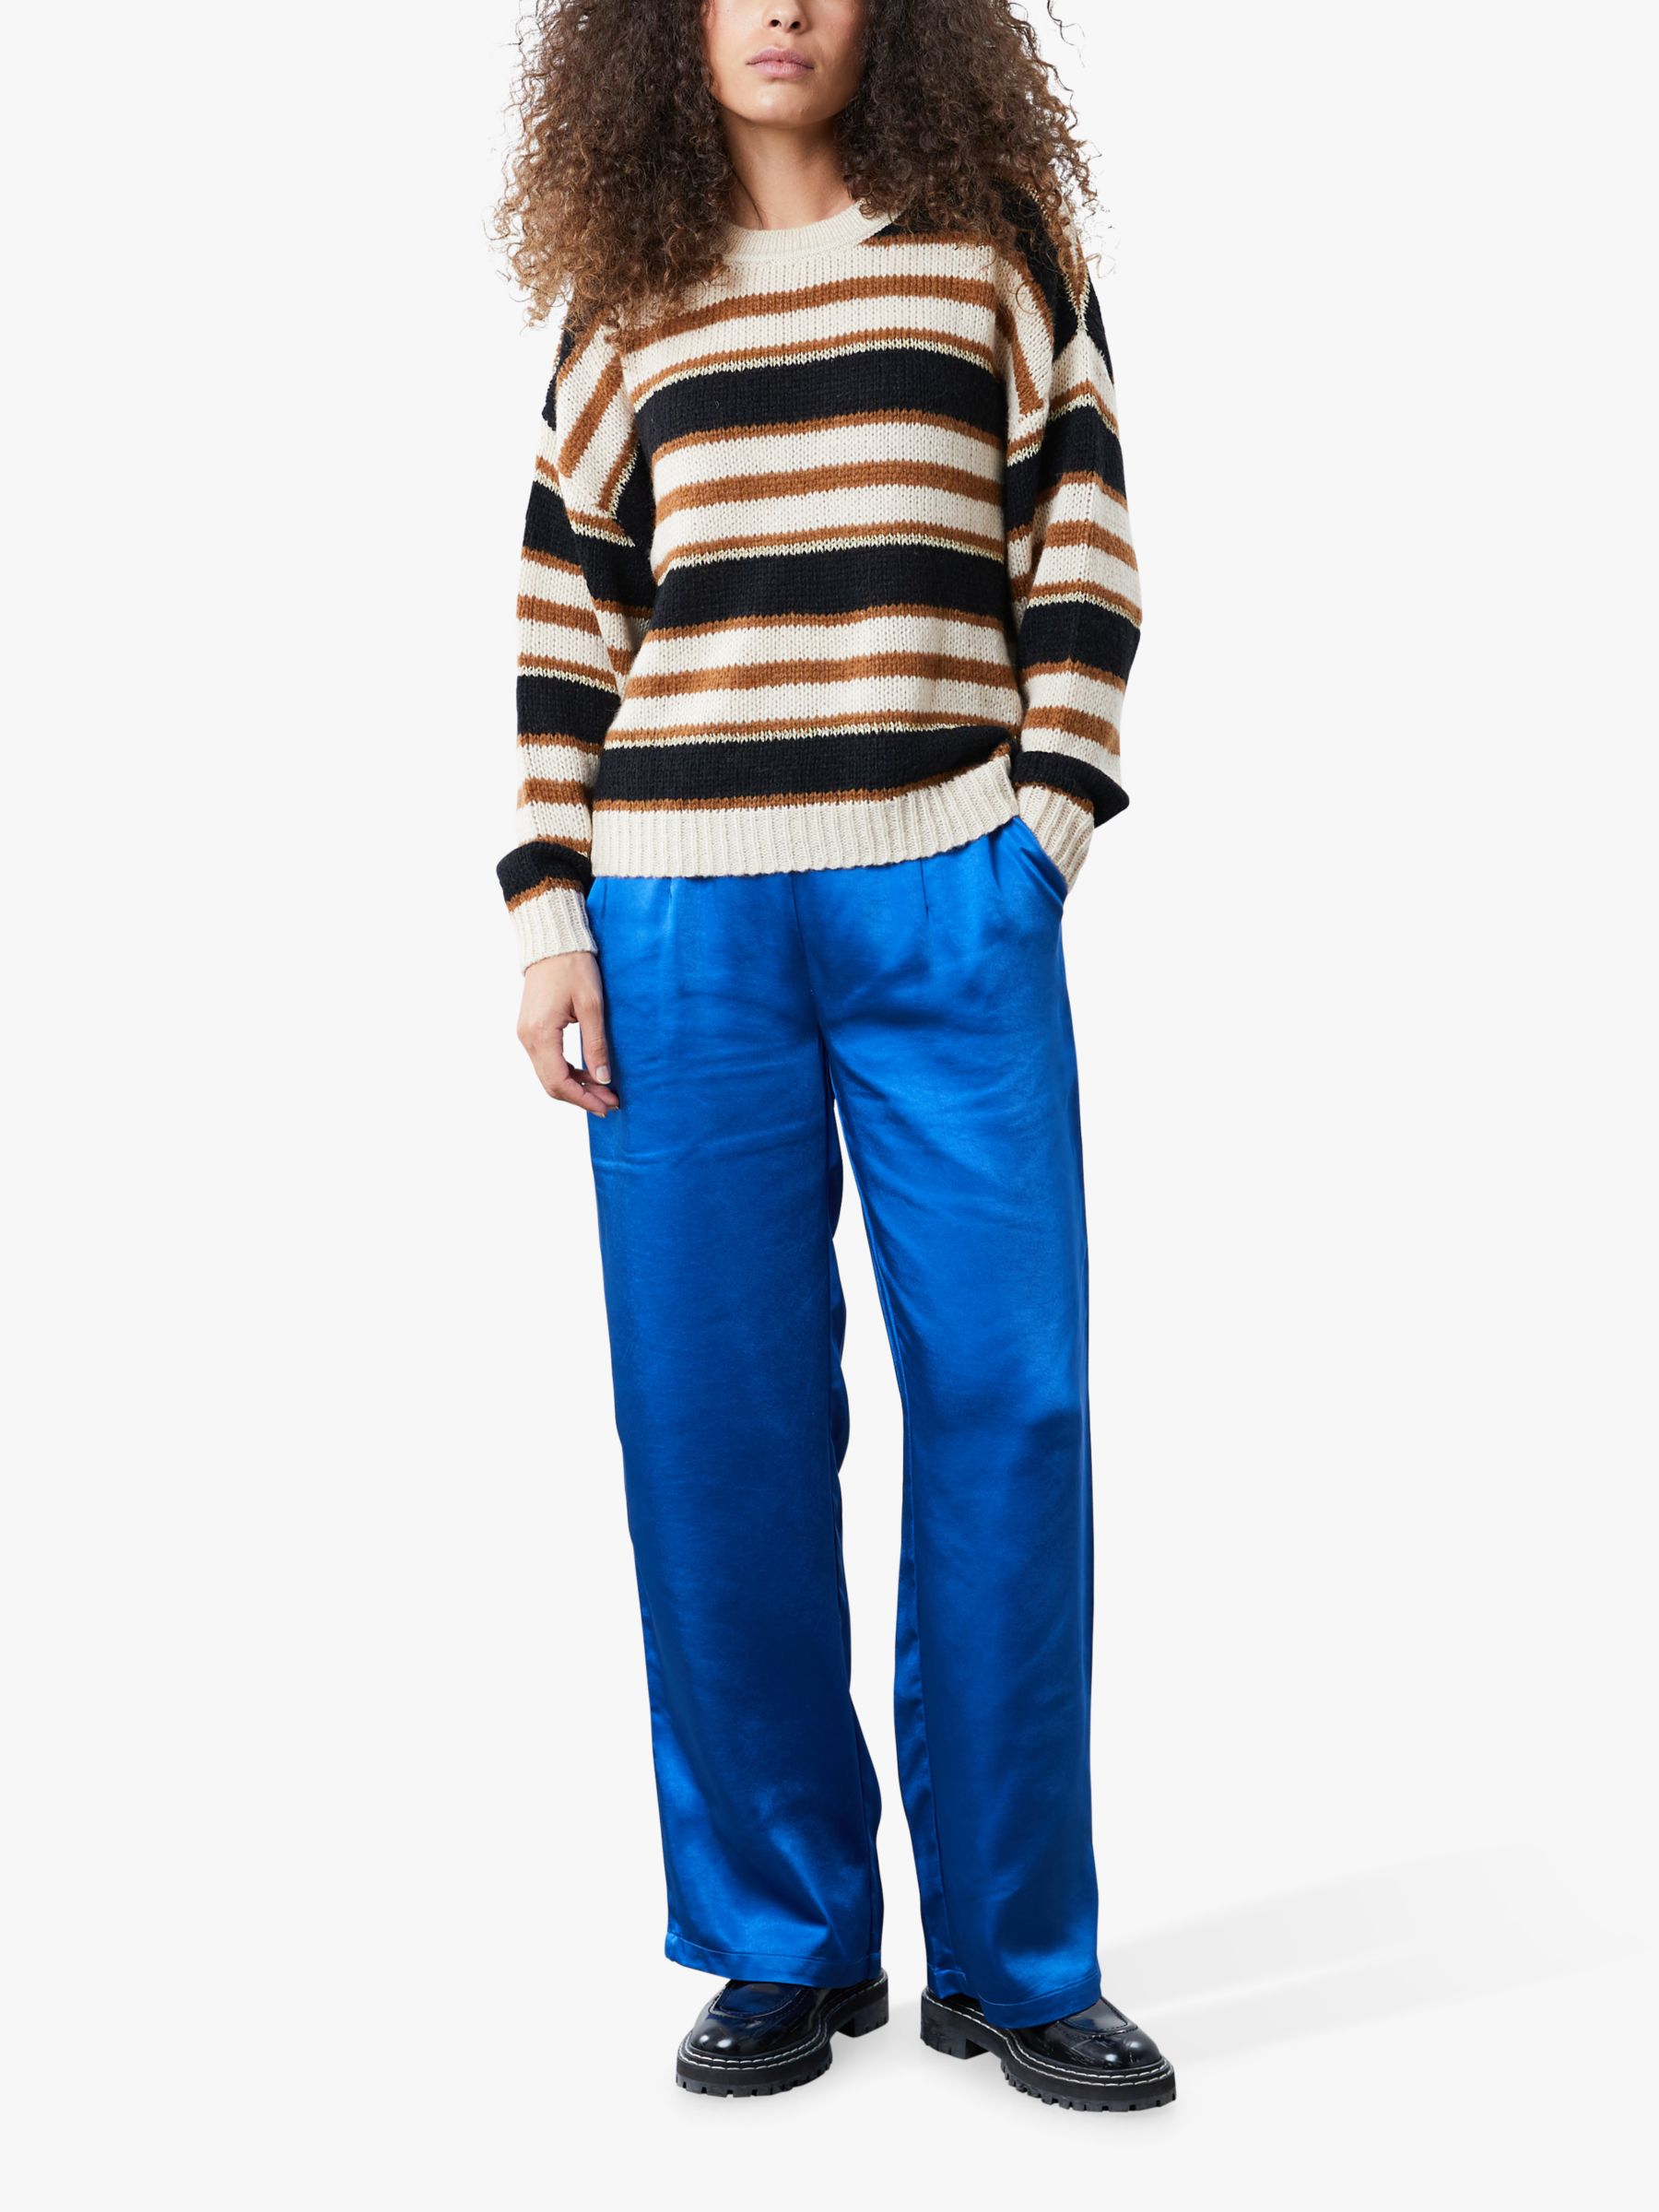 Buy Lollys Laundry Terry Striped Jumper, Cream/Multi Online at johnlewis.com